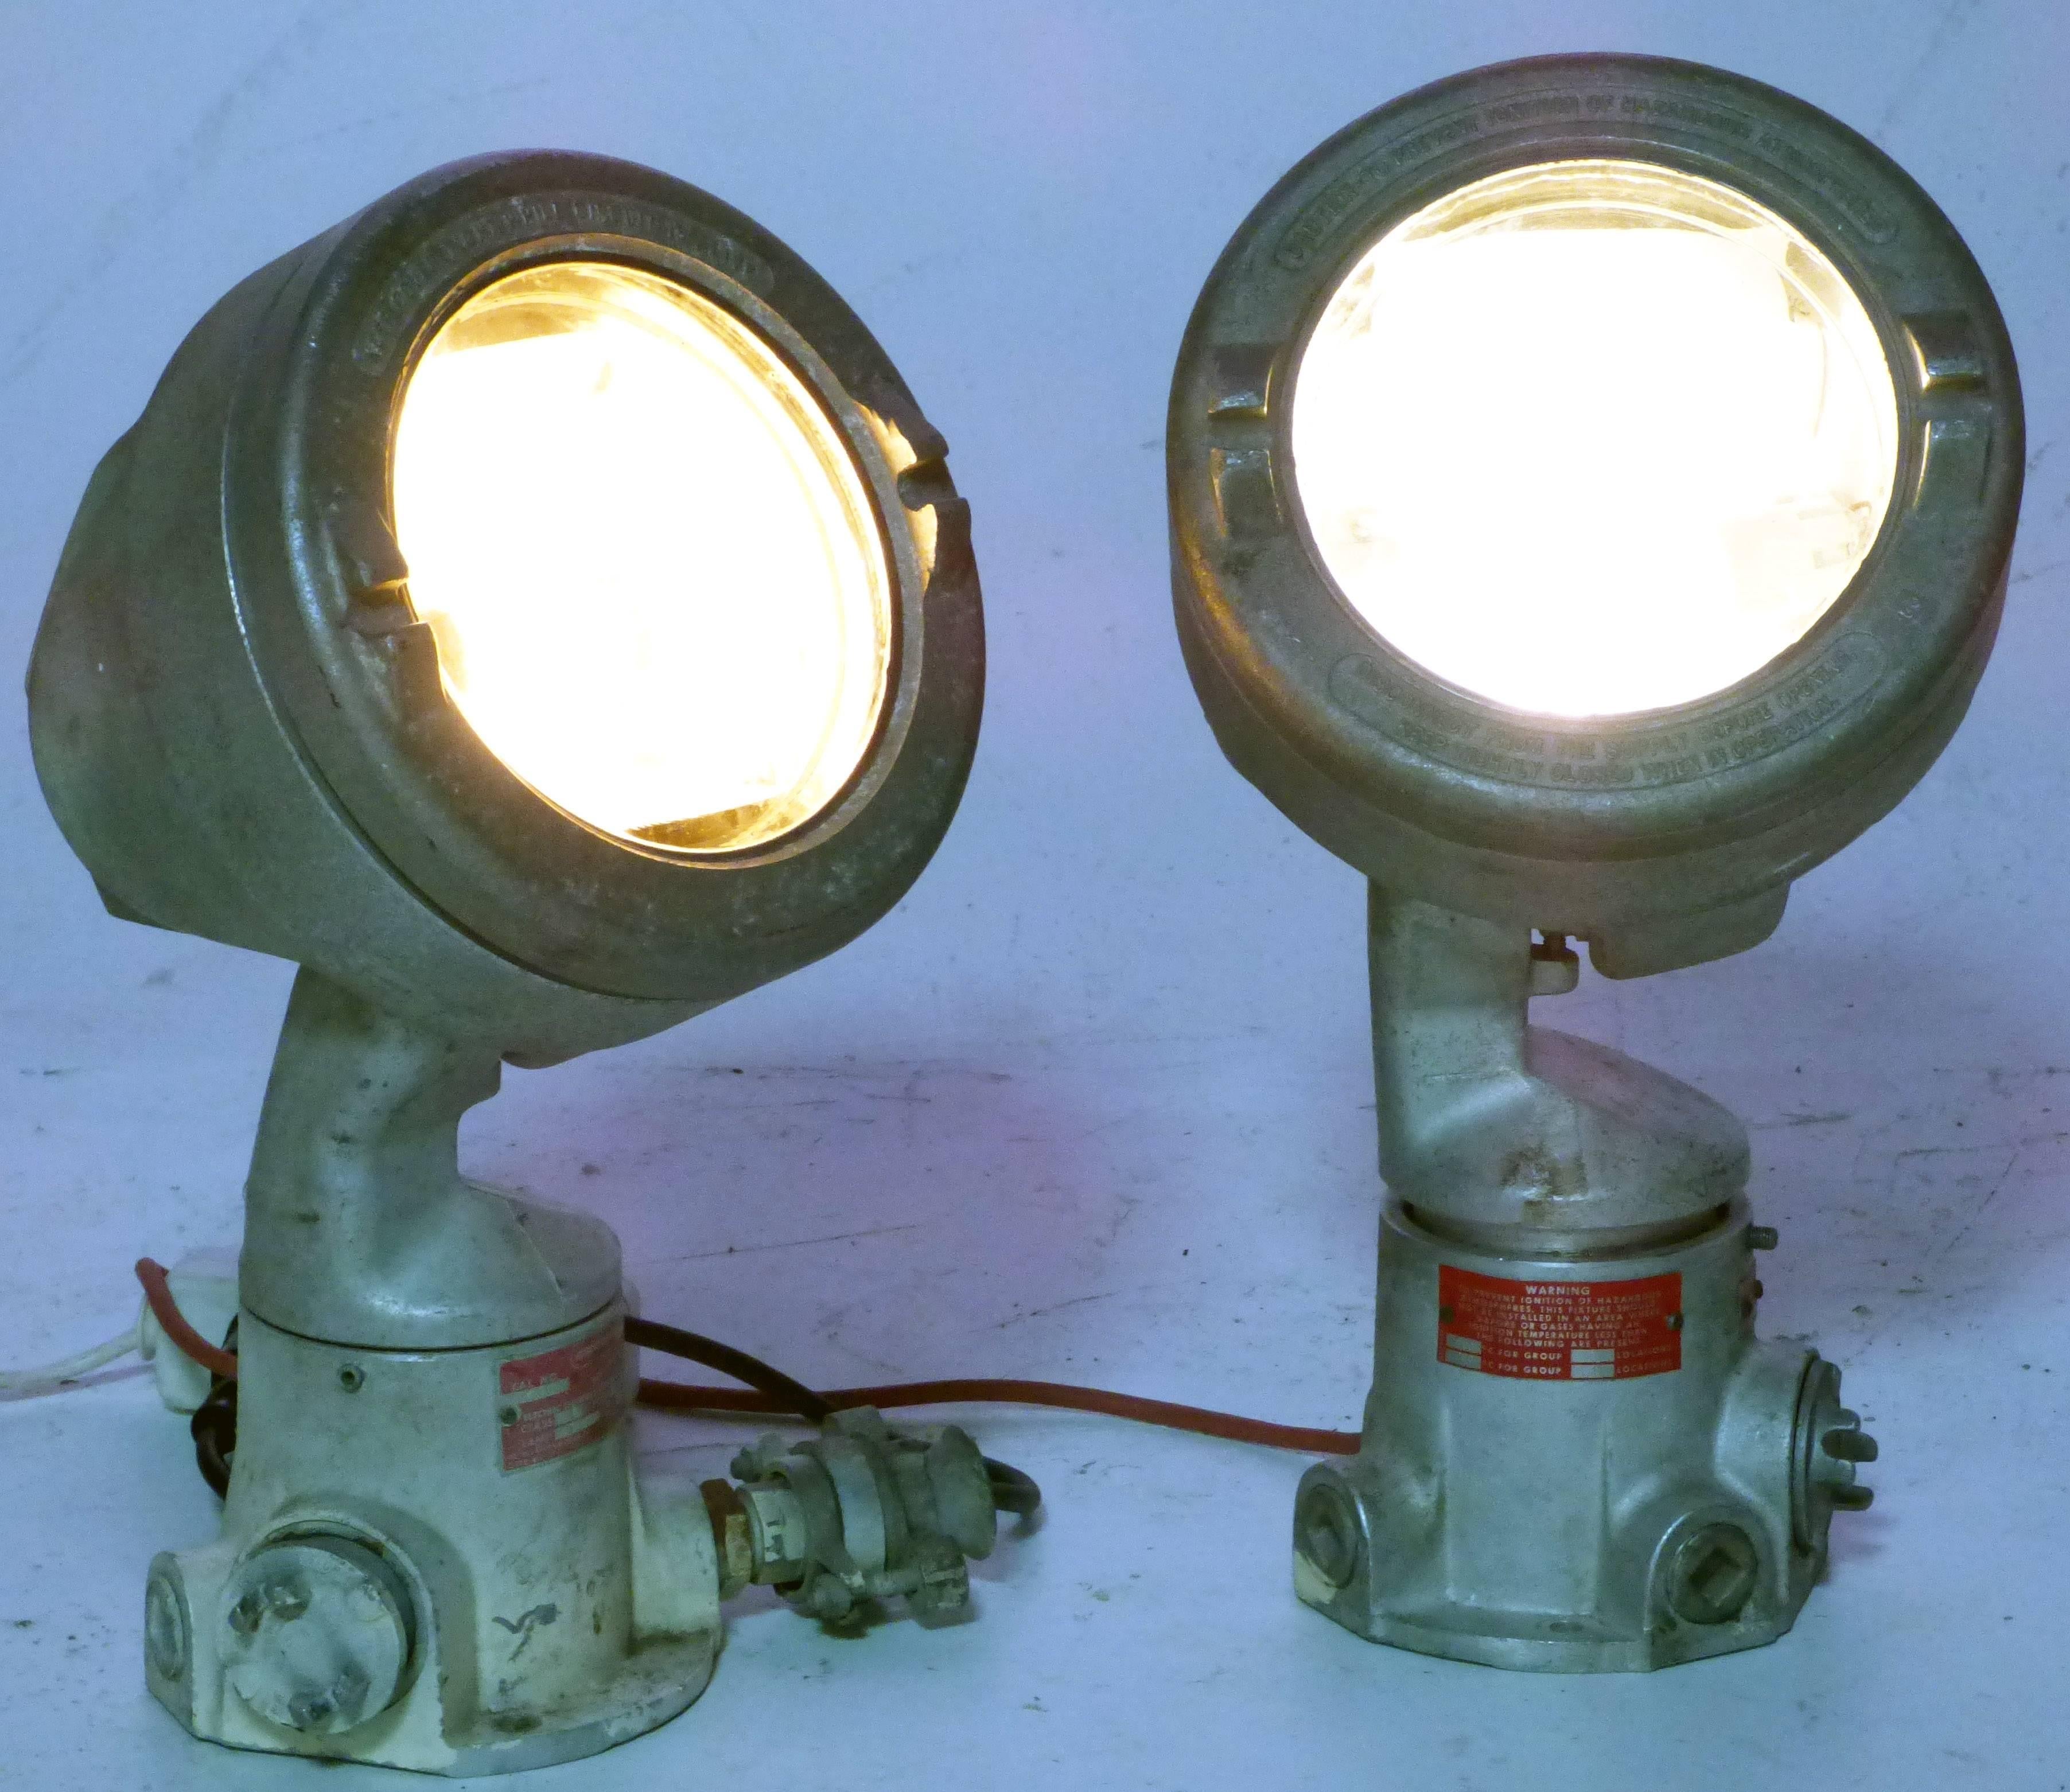 Very heavy and massive signal spotlights by Crouse Hinds for nautical use.
Both lights are made massive metal. The heads are swiveling up and down. 
So, they perfectly work as floor lamps for direct or indirect light.

Plugged with a schuko